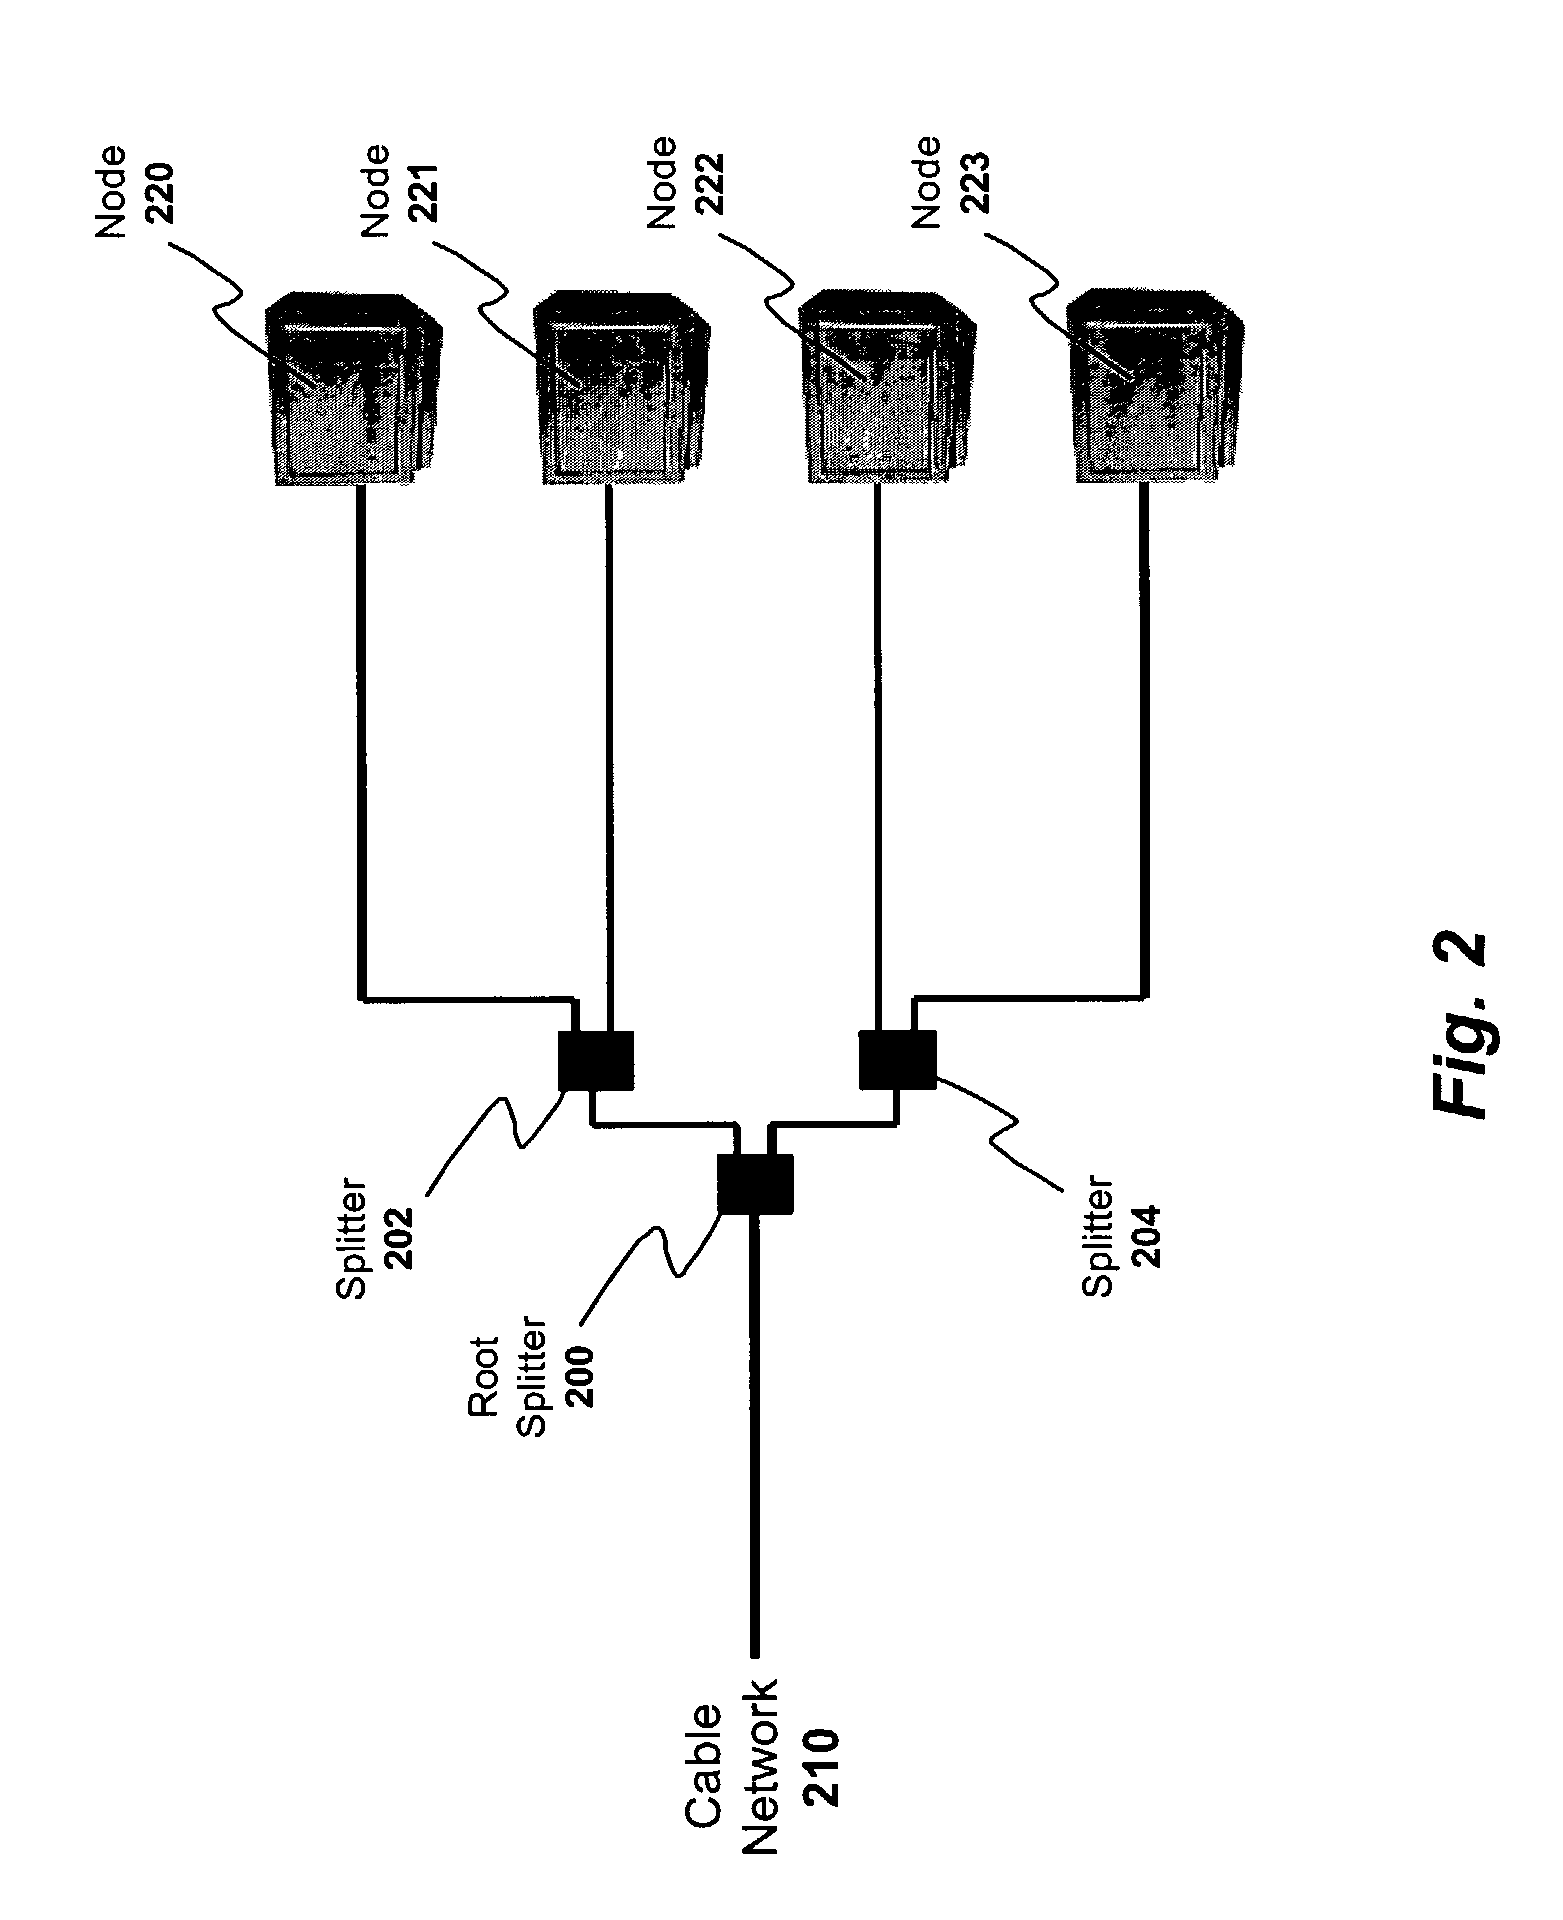 System and method for automatically sensing the state of a video display device